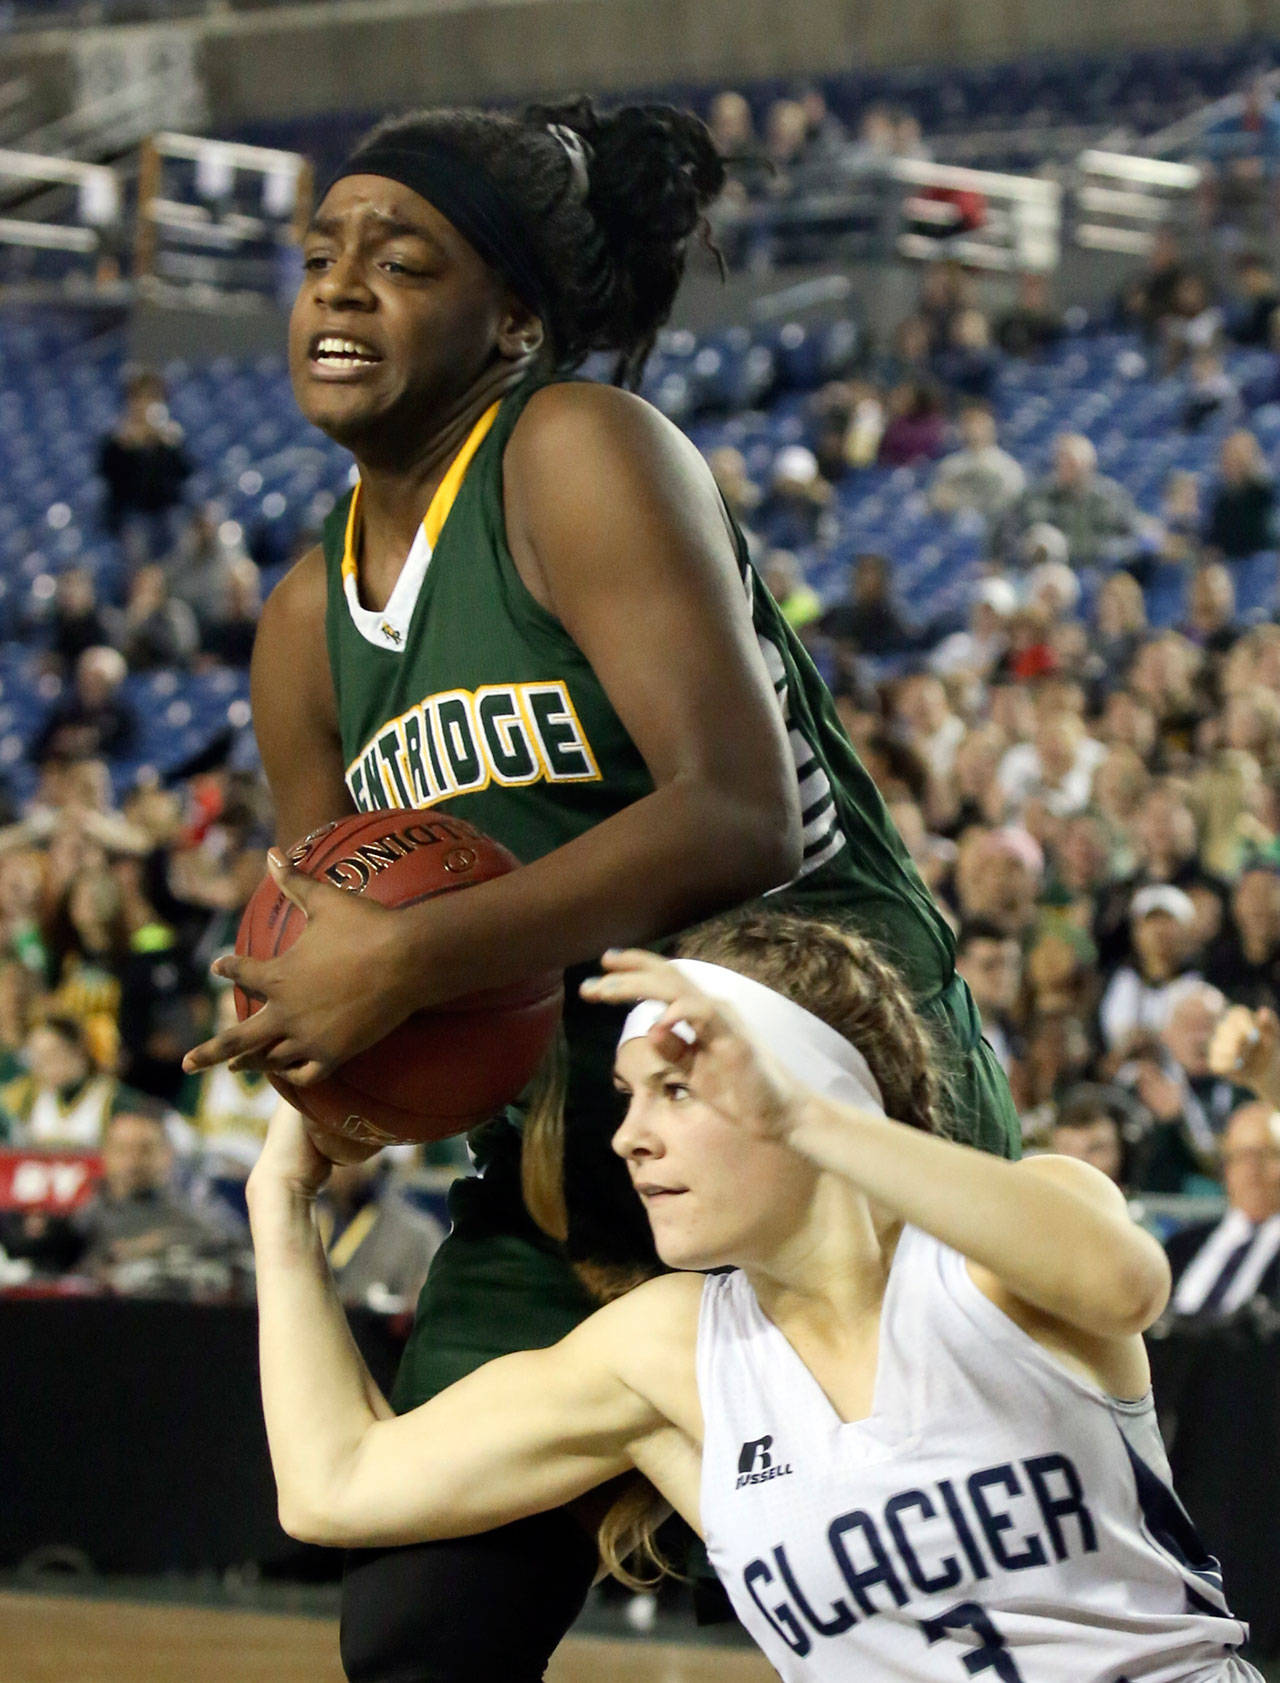 Kentridge’s Jordyn Jenkins wrests the ball away from Glacier Peak’s Paisley Johnson during the Chargers’ 60-46 win over the Grizzlies in the 4A state championship game on Saturday in Tacoma. (Kevin Clark / The Herald)